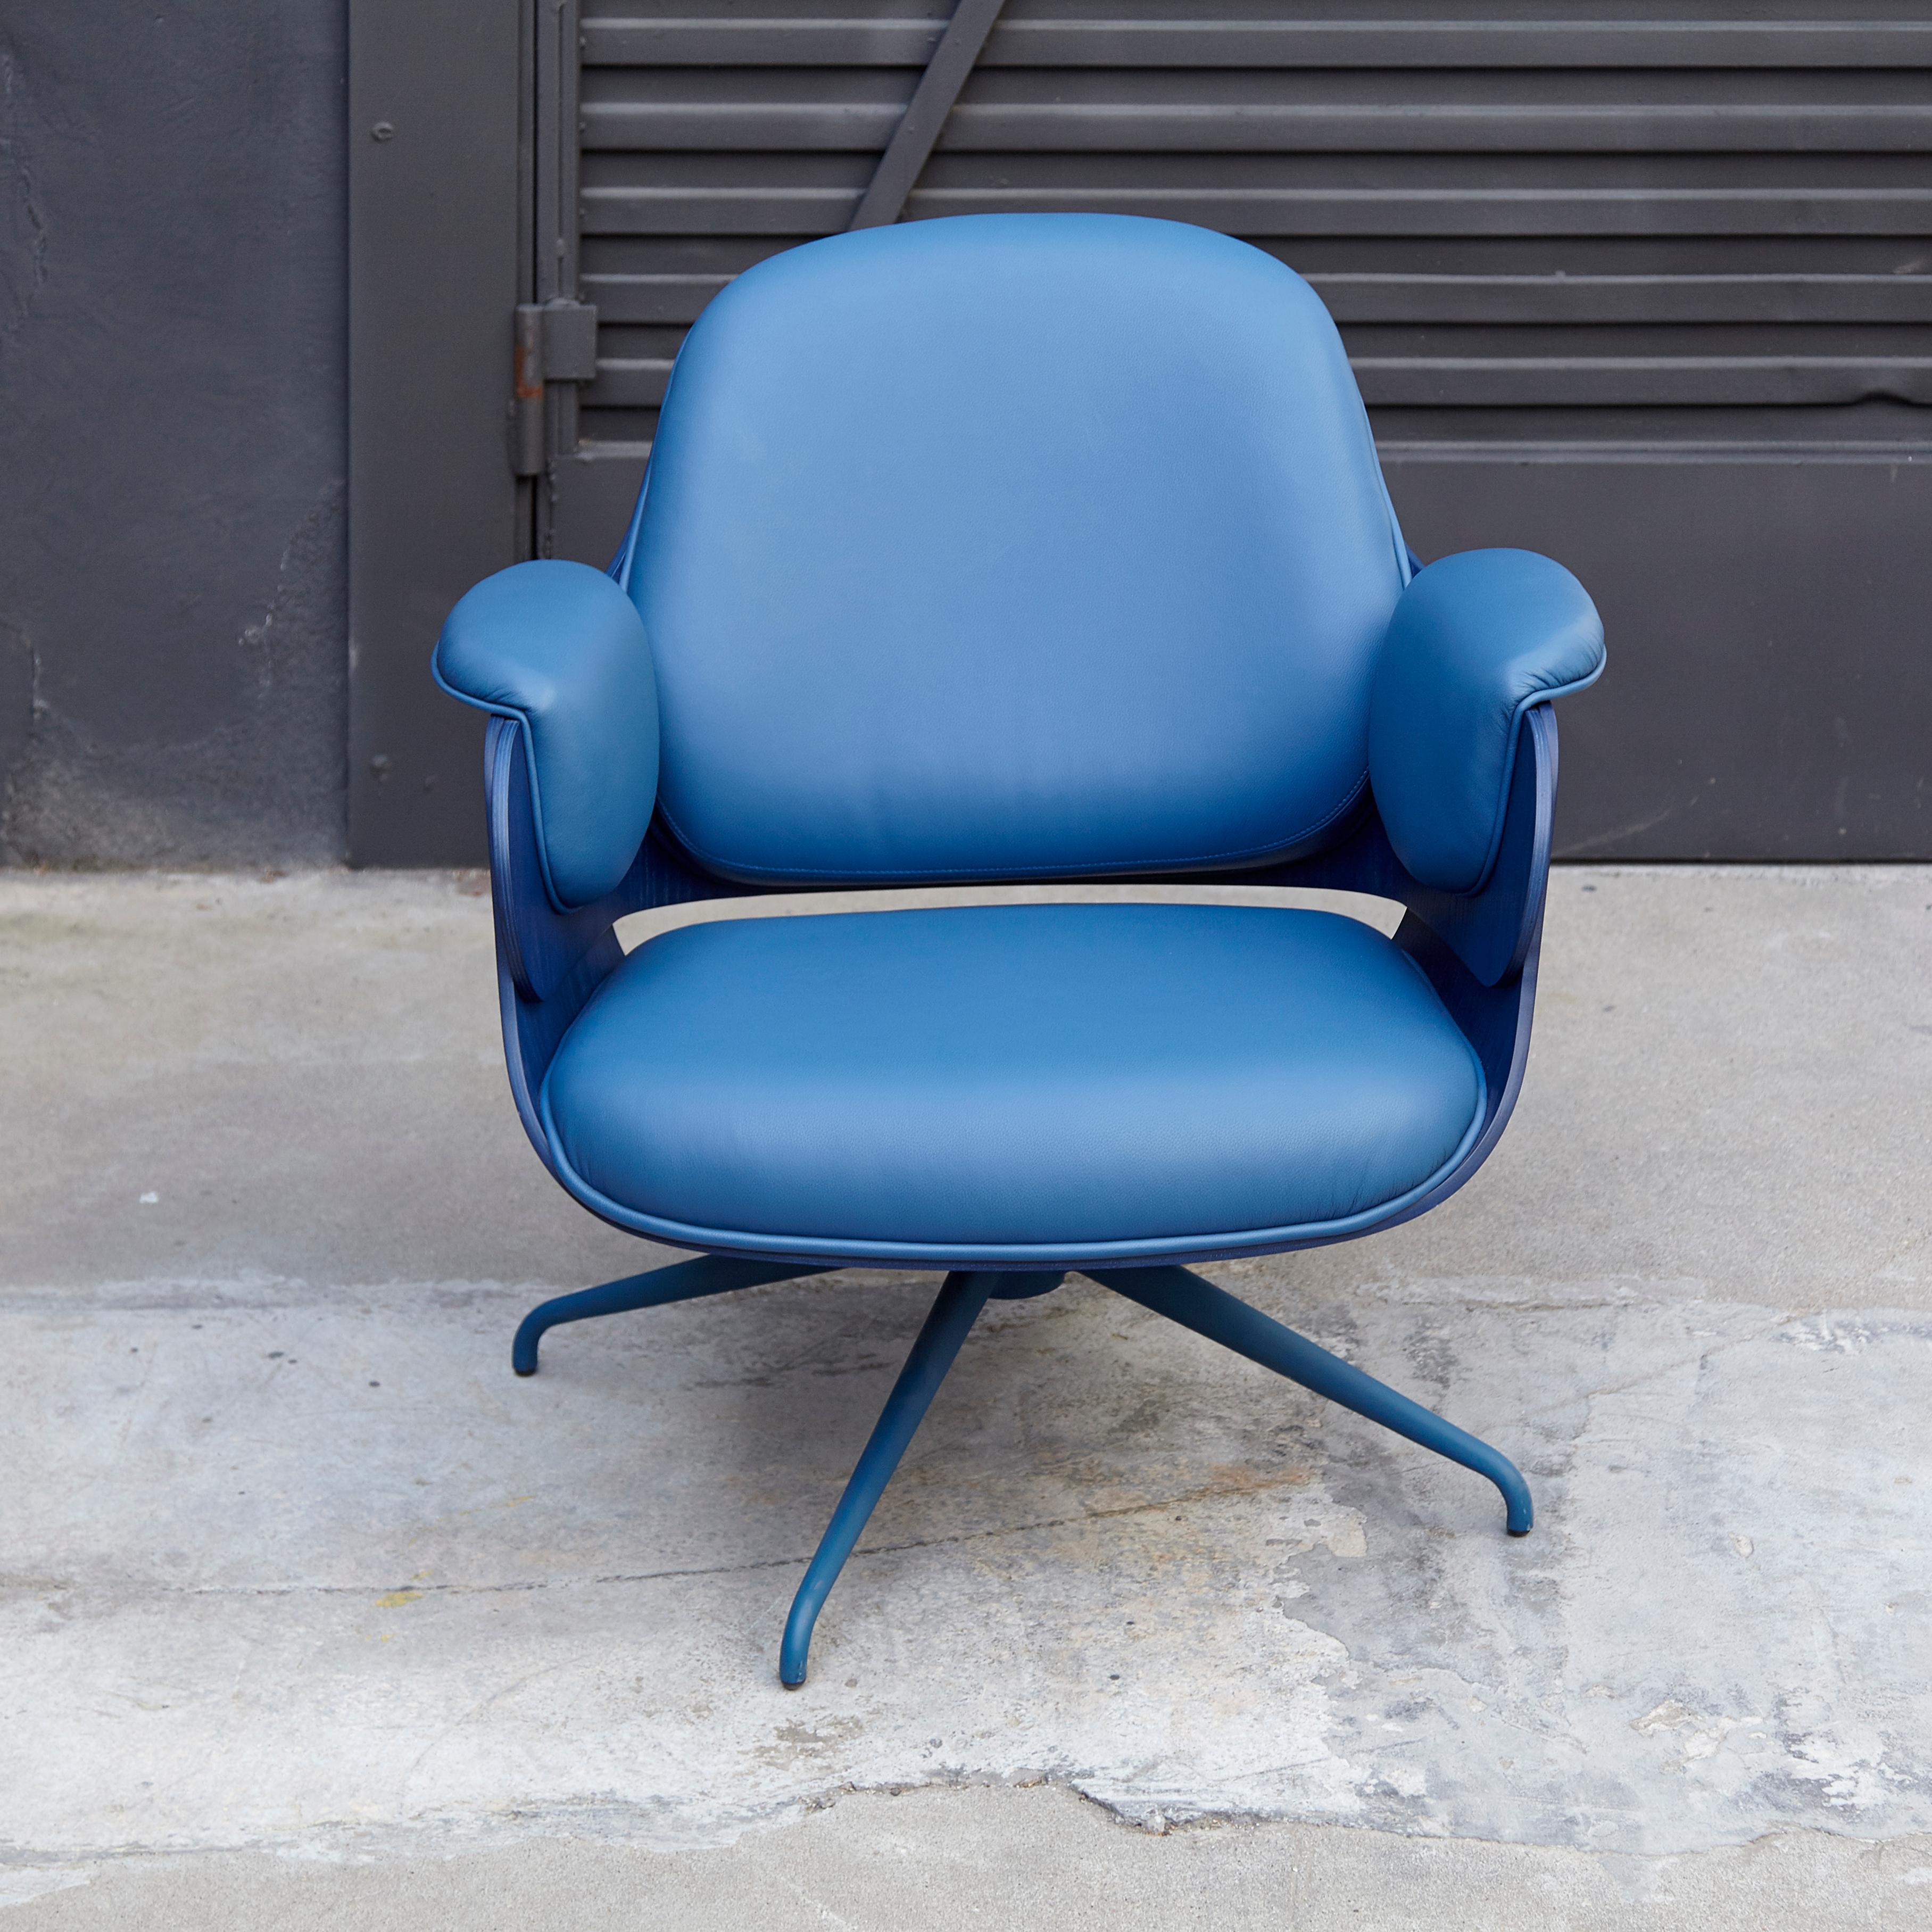 Armchair structure base in cast aluminium.

Structure base in tubular steel and painted. Seat, backrest are in plywood with exteriors in Blue effect, and blue upholstery.
 
Has some wear consistent of age and use.